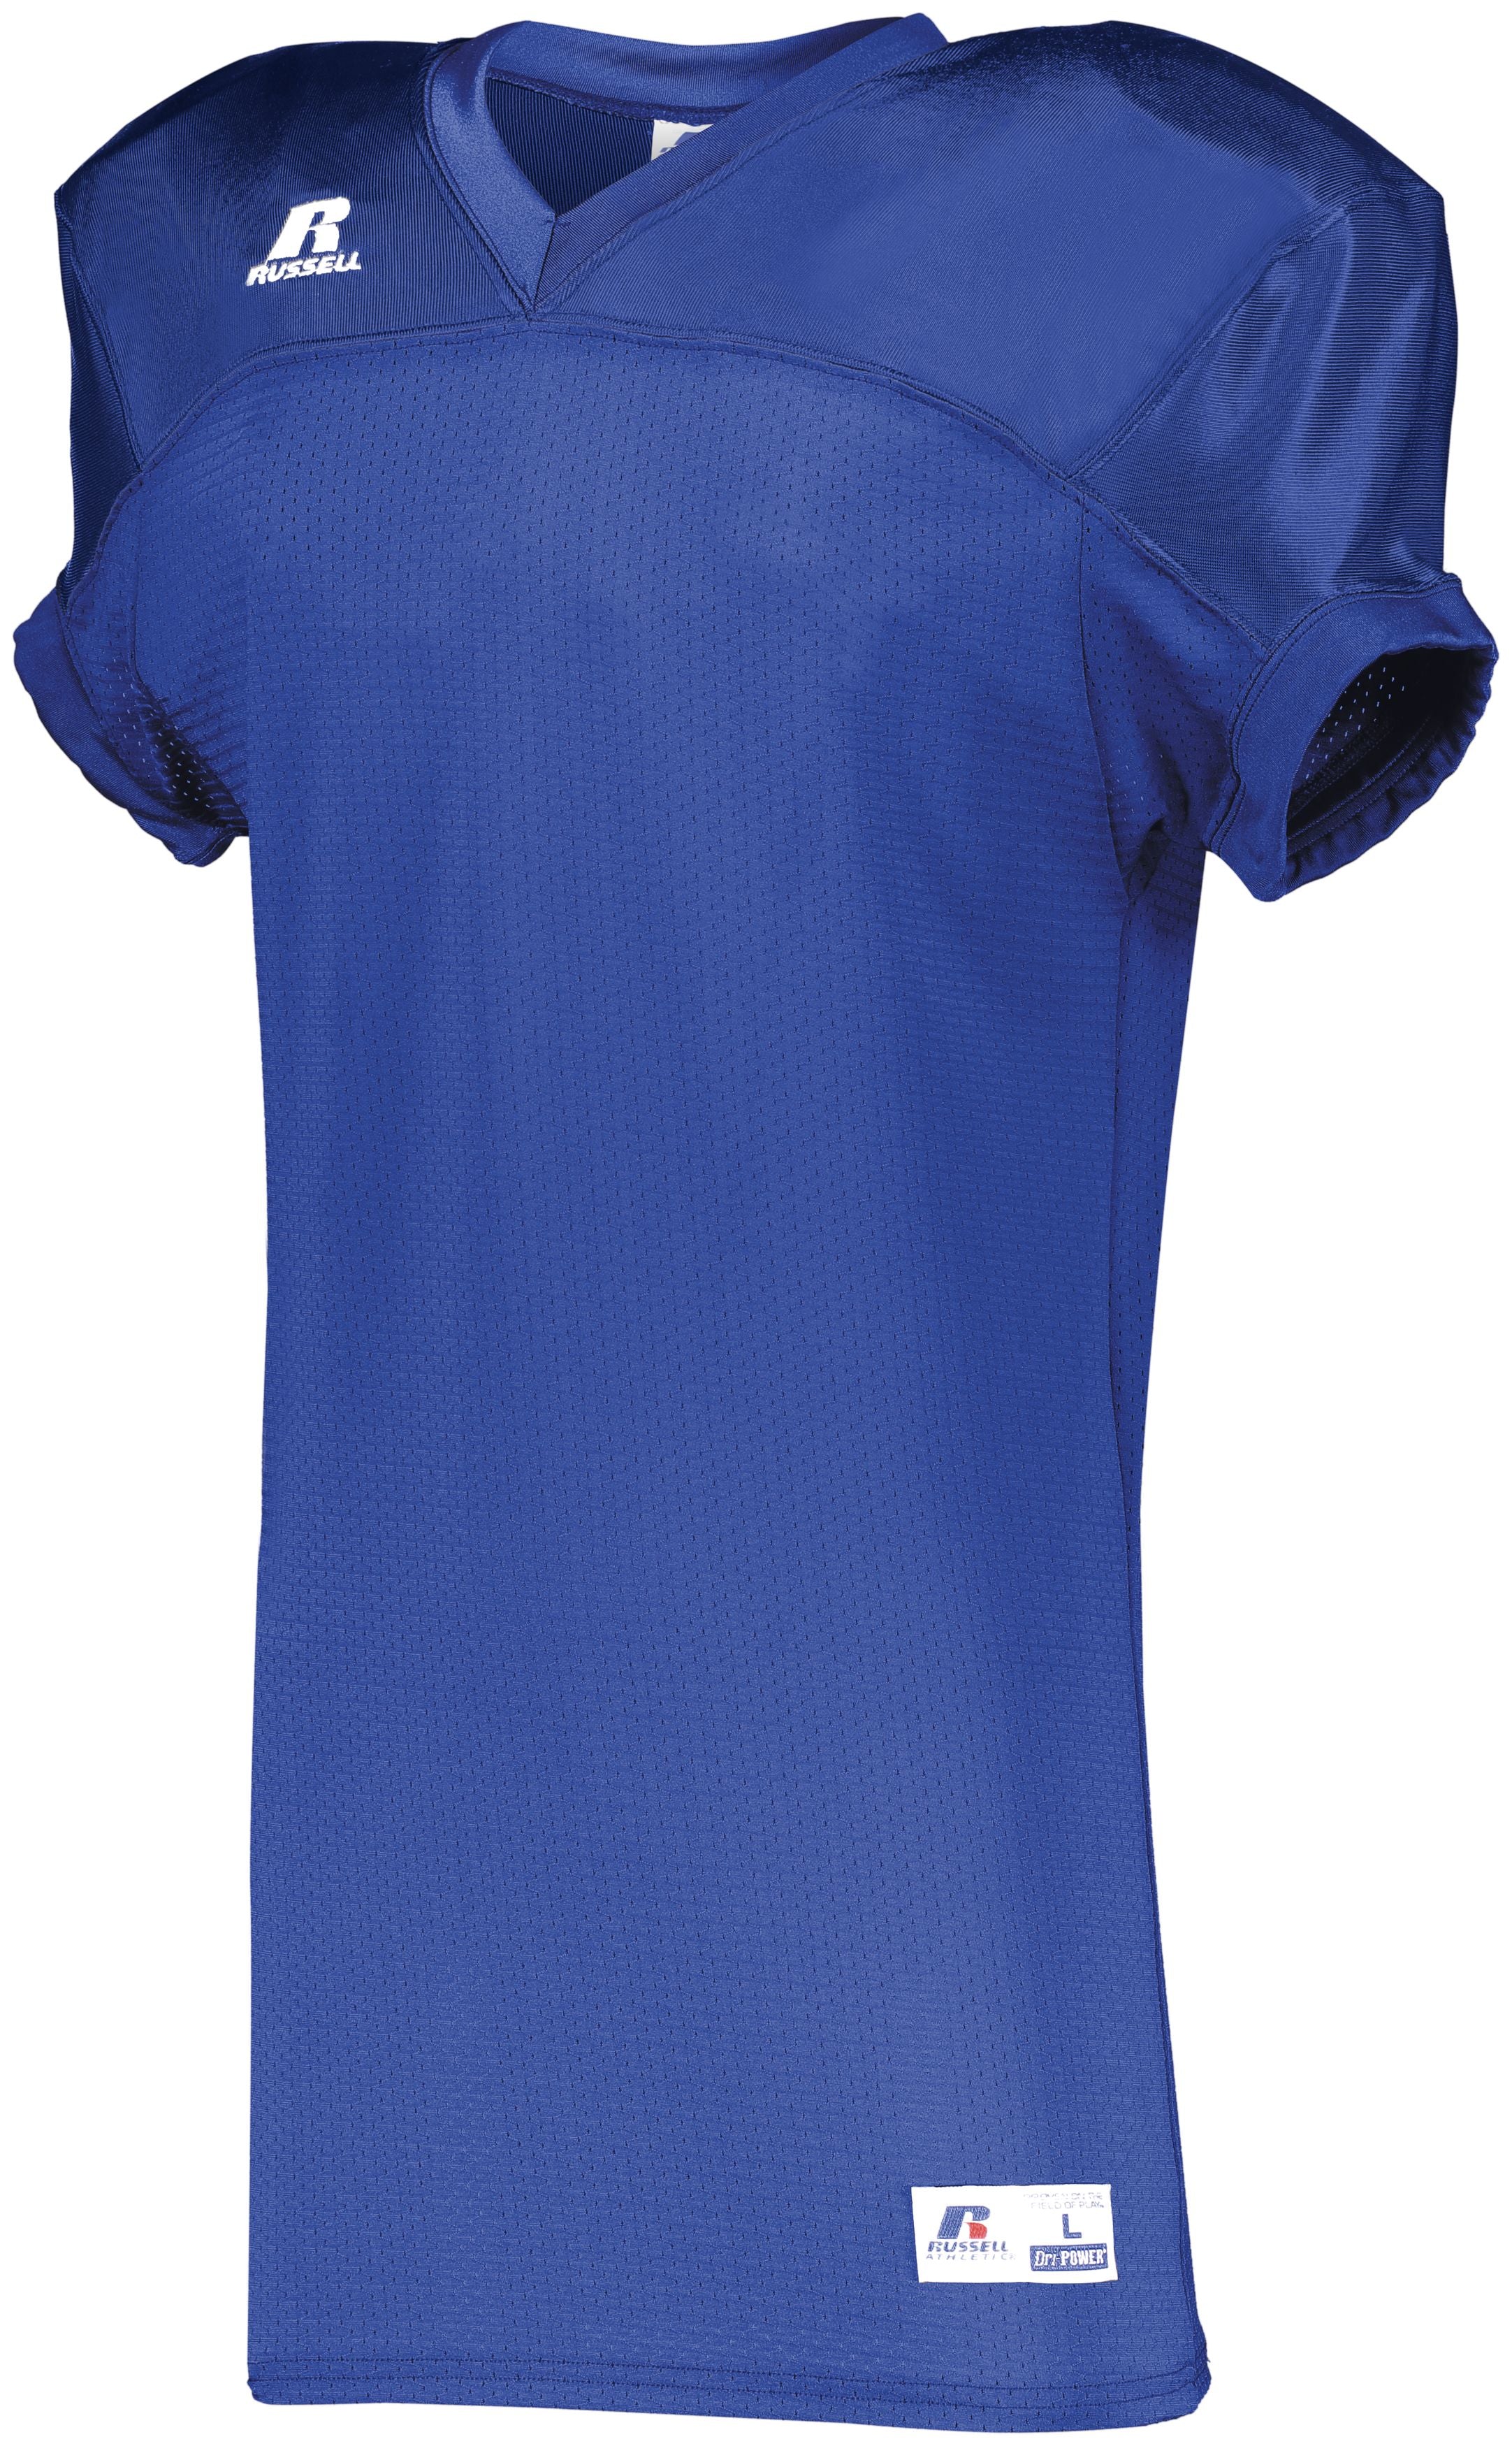 Russell Athletic Stretch Mesh Game Jersey in Royal  -Part of the Adult, Adult-Jersey, Football, Russell-Athletic-Products, Shirts, All-Sports, All-Sports-1 product lines at KanaleyCreations.com